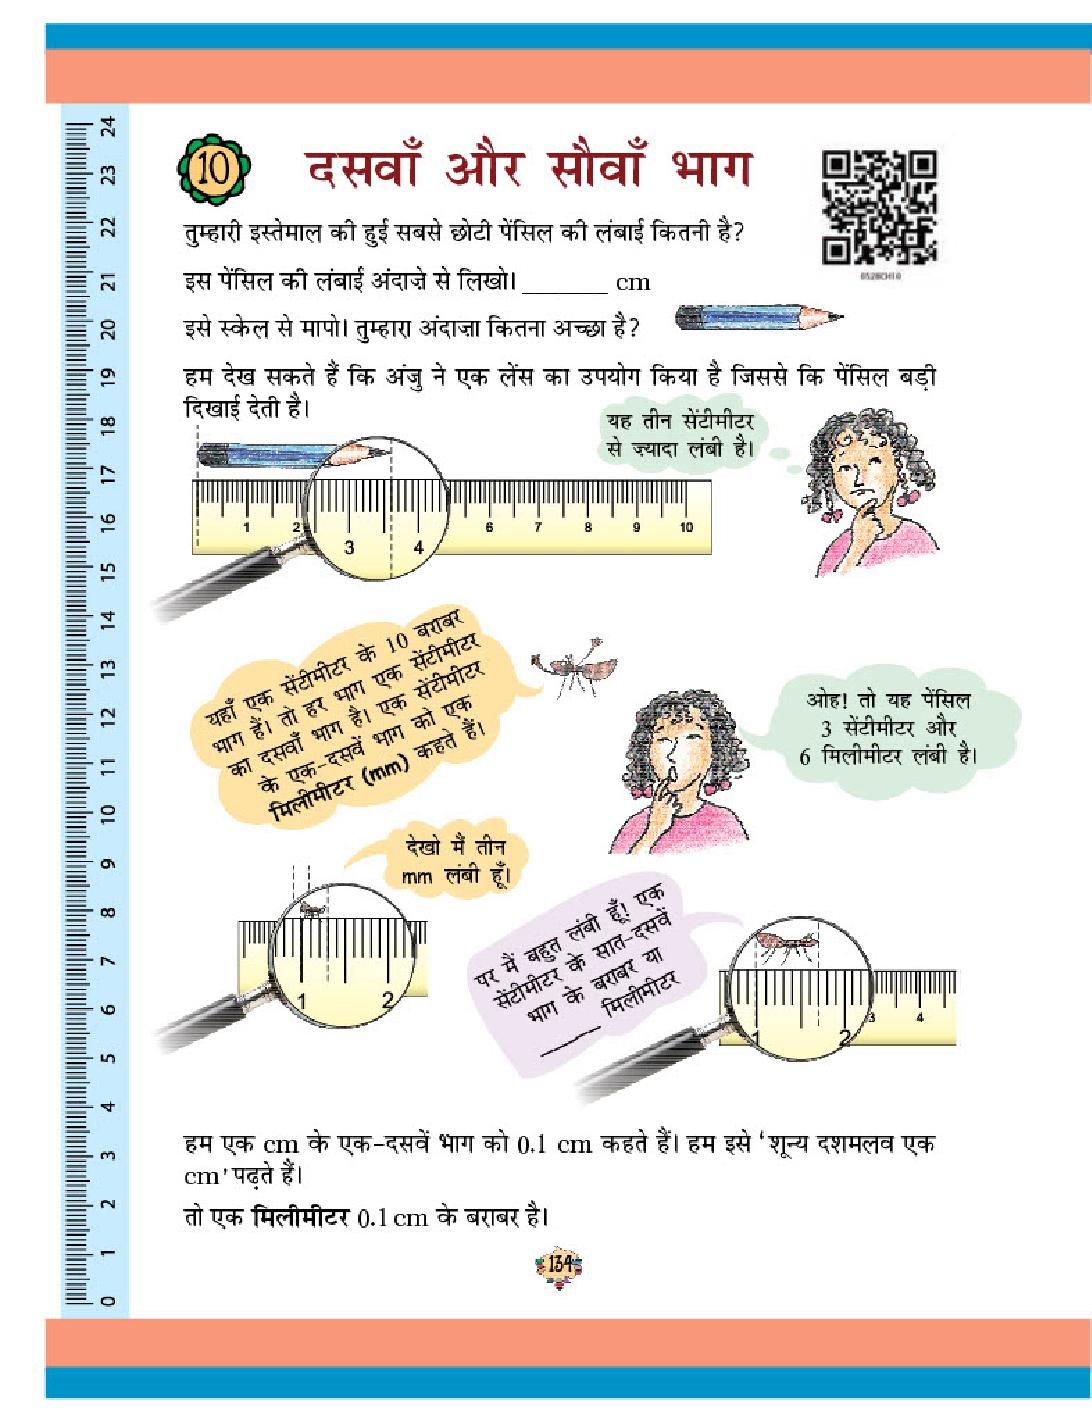 NCERT Book Class 5 Maths (गणित) Chapter 10 दसवाँ और सोवाँ भाग - Page 1